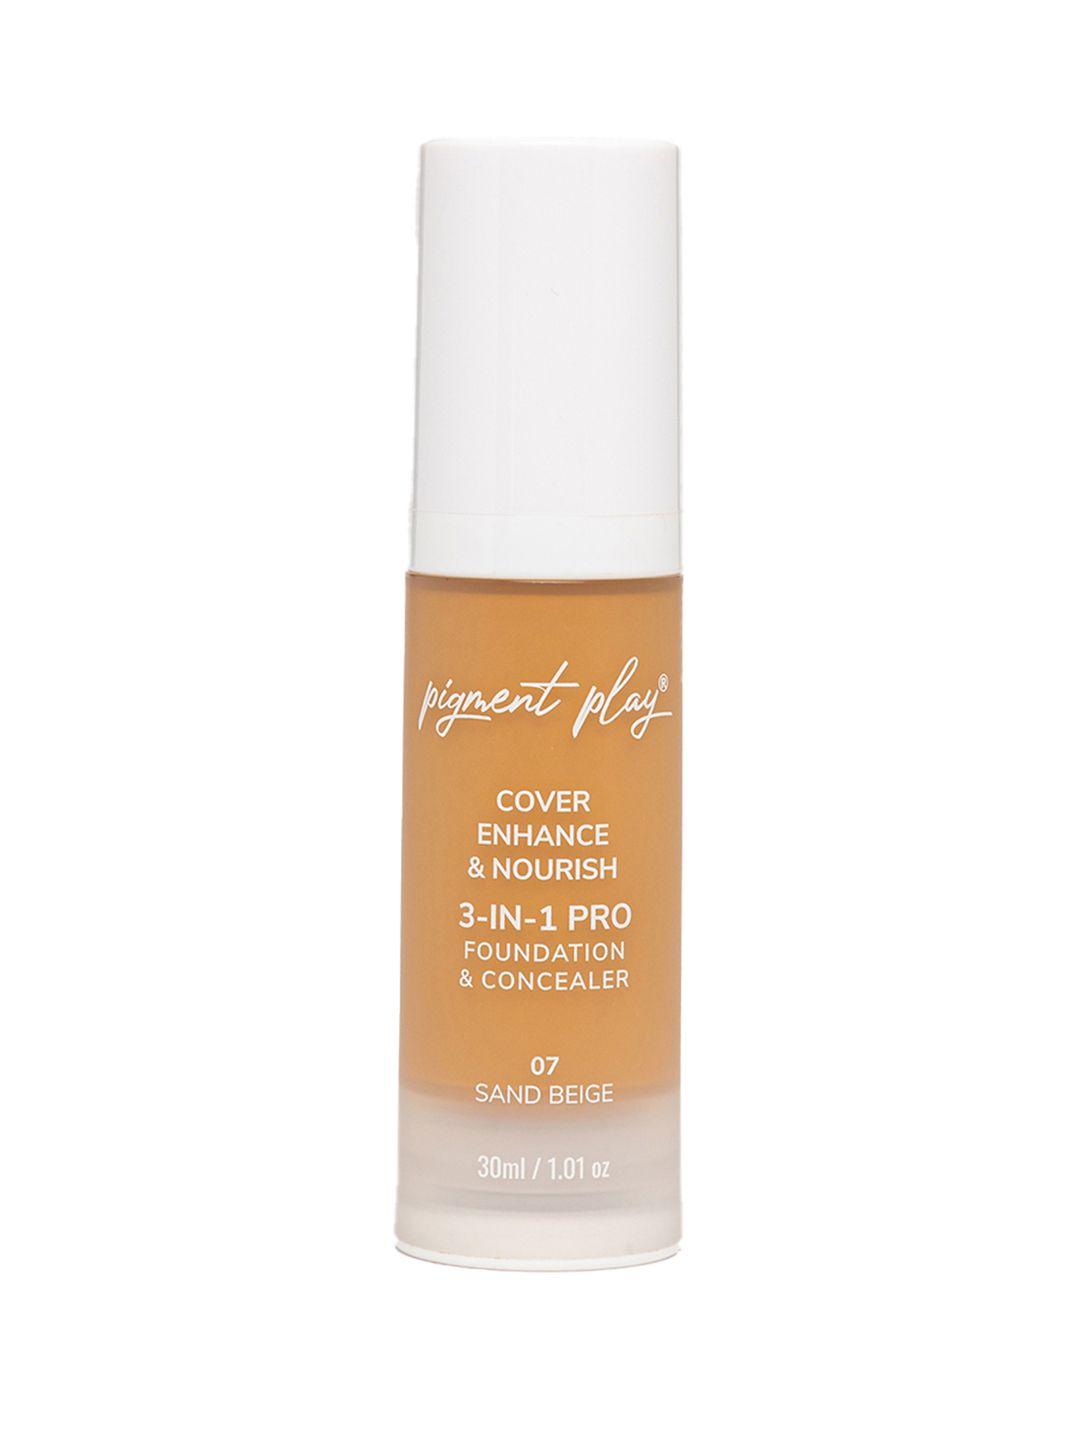 pigment play cover enhance & nourish 3-in-1 pro foundation & concealer - sand beige 07